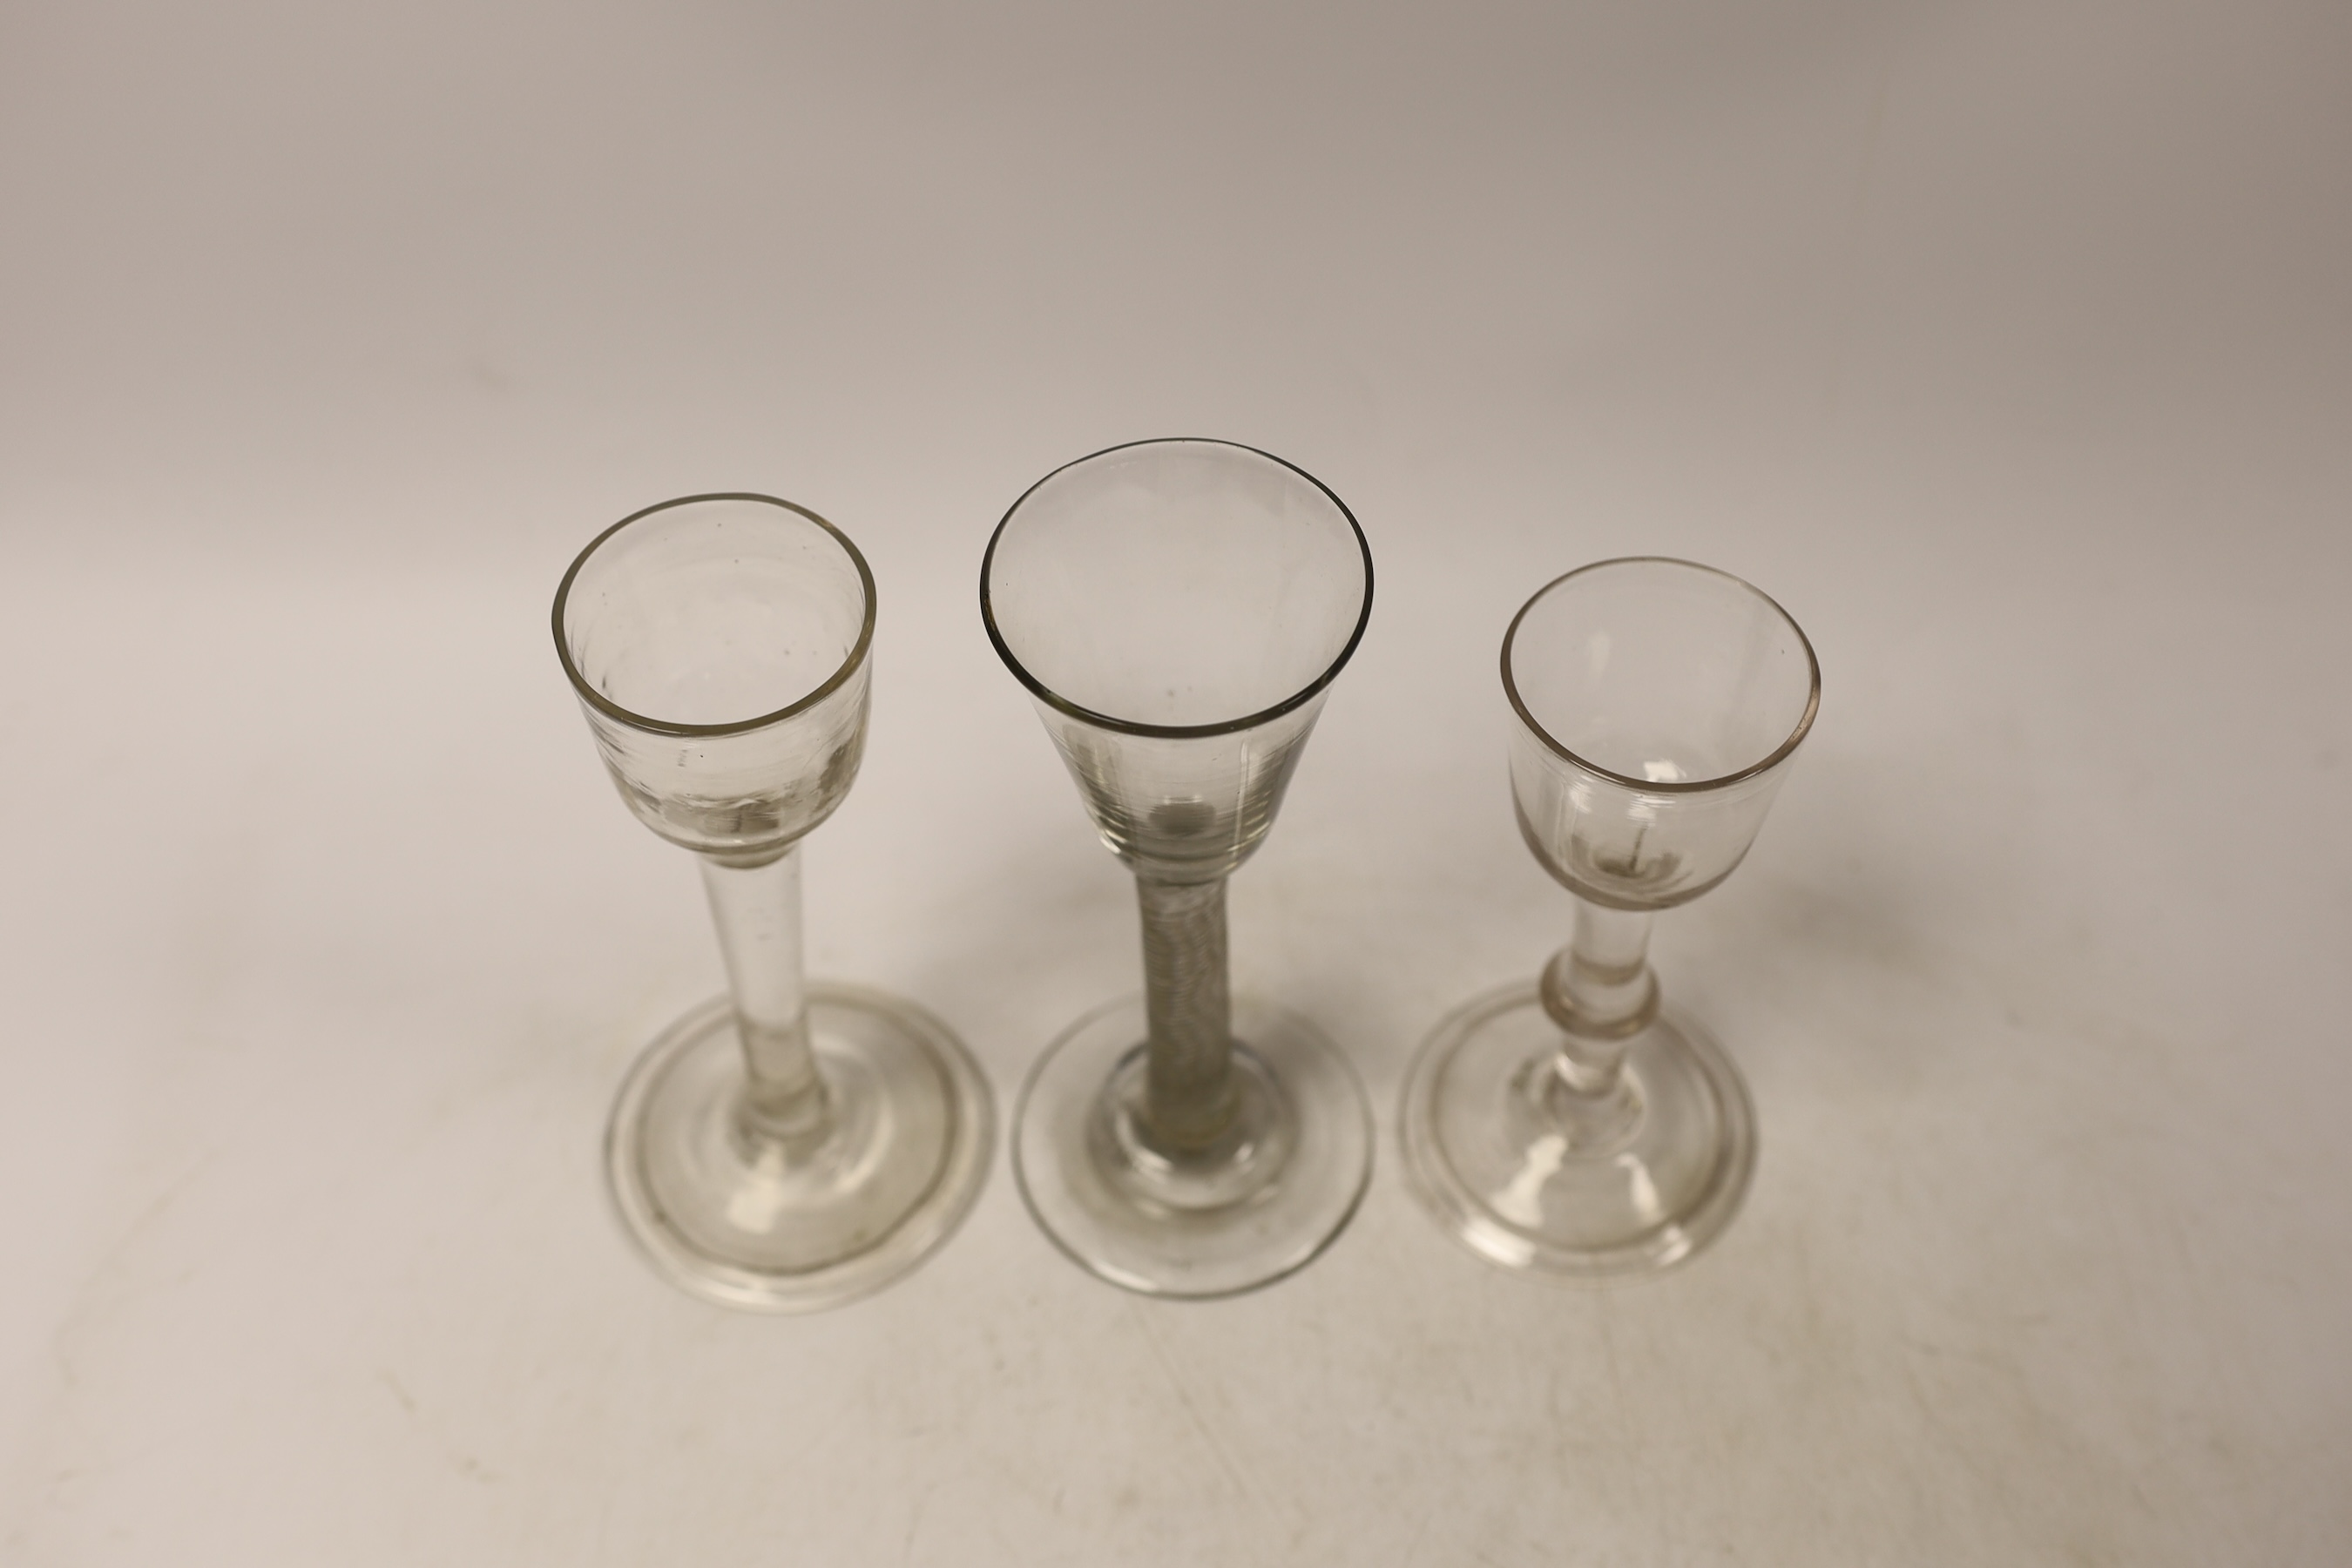 Three cordial glasses, first half 18th century, two with a folded foot, one with single knop and one with an incised twist stem, tallest 16cm